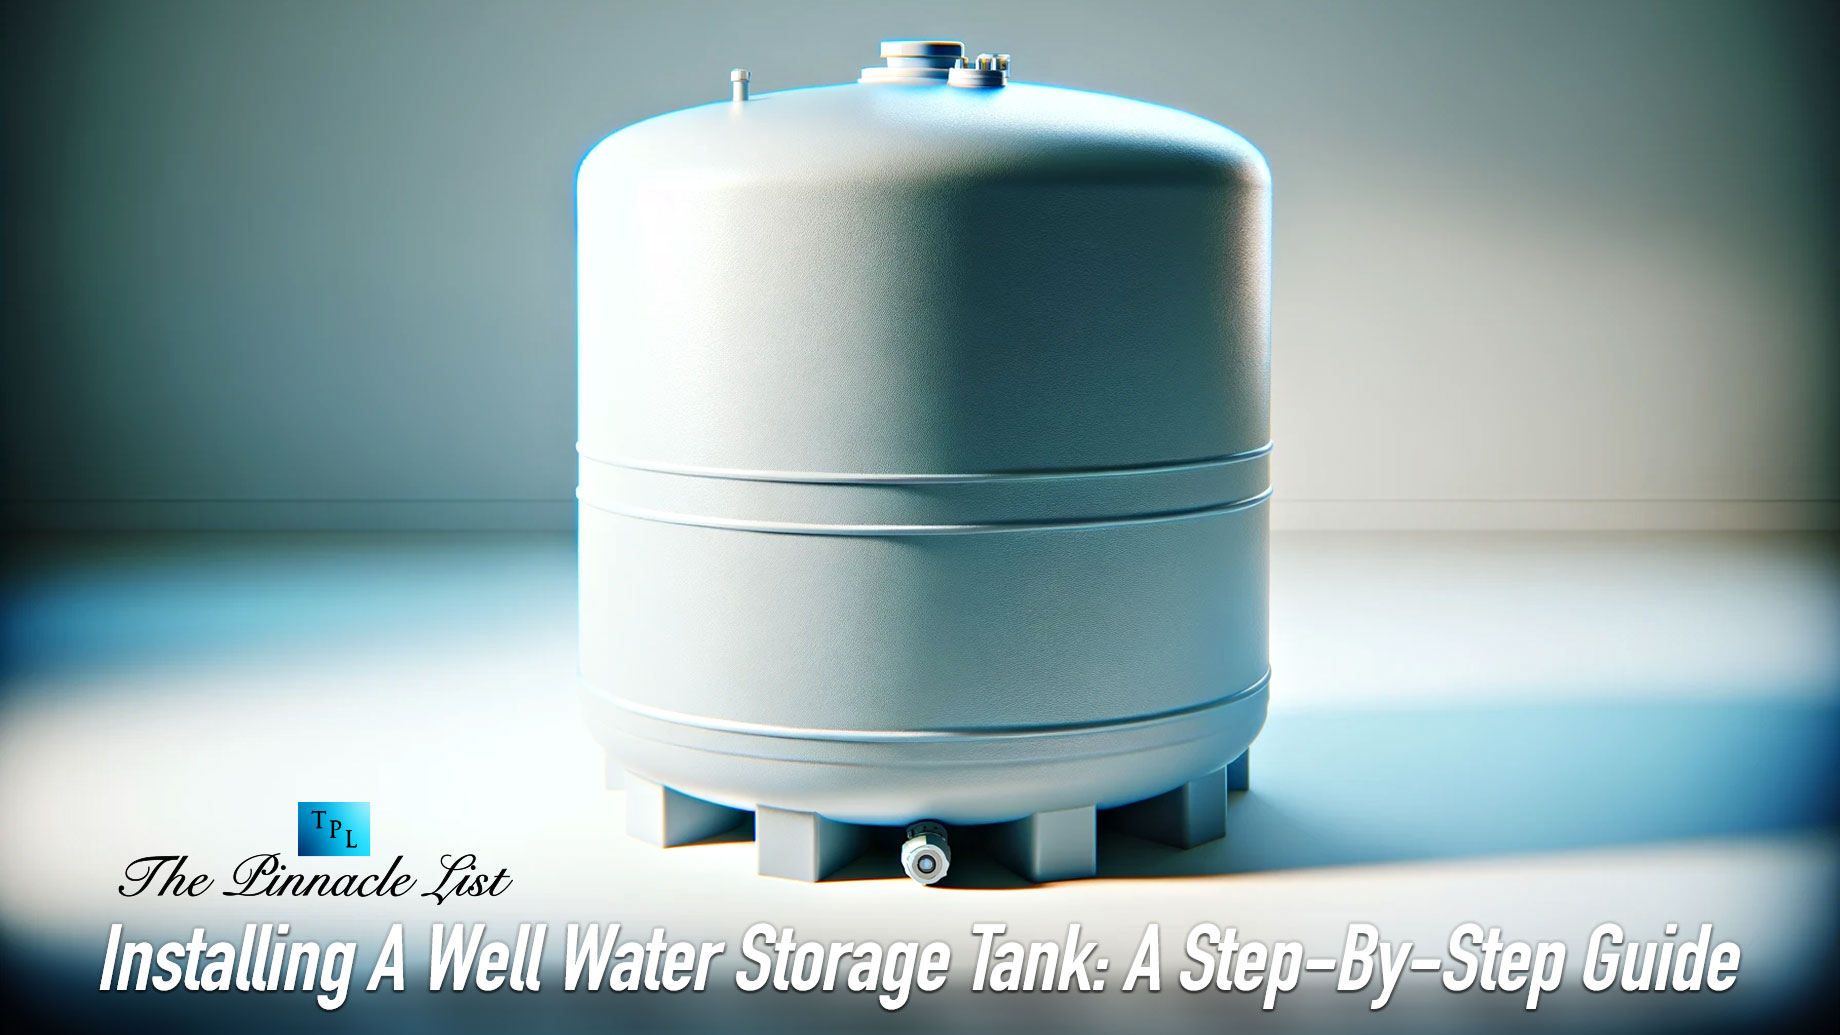 Installing A Well Water Storage Tank: A Step-By-Step Guide